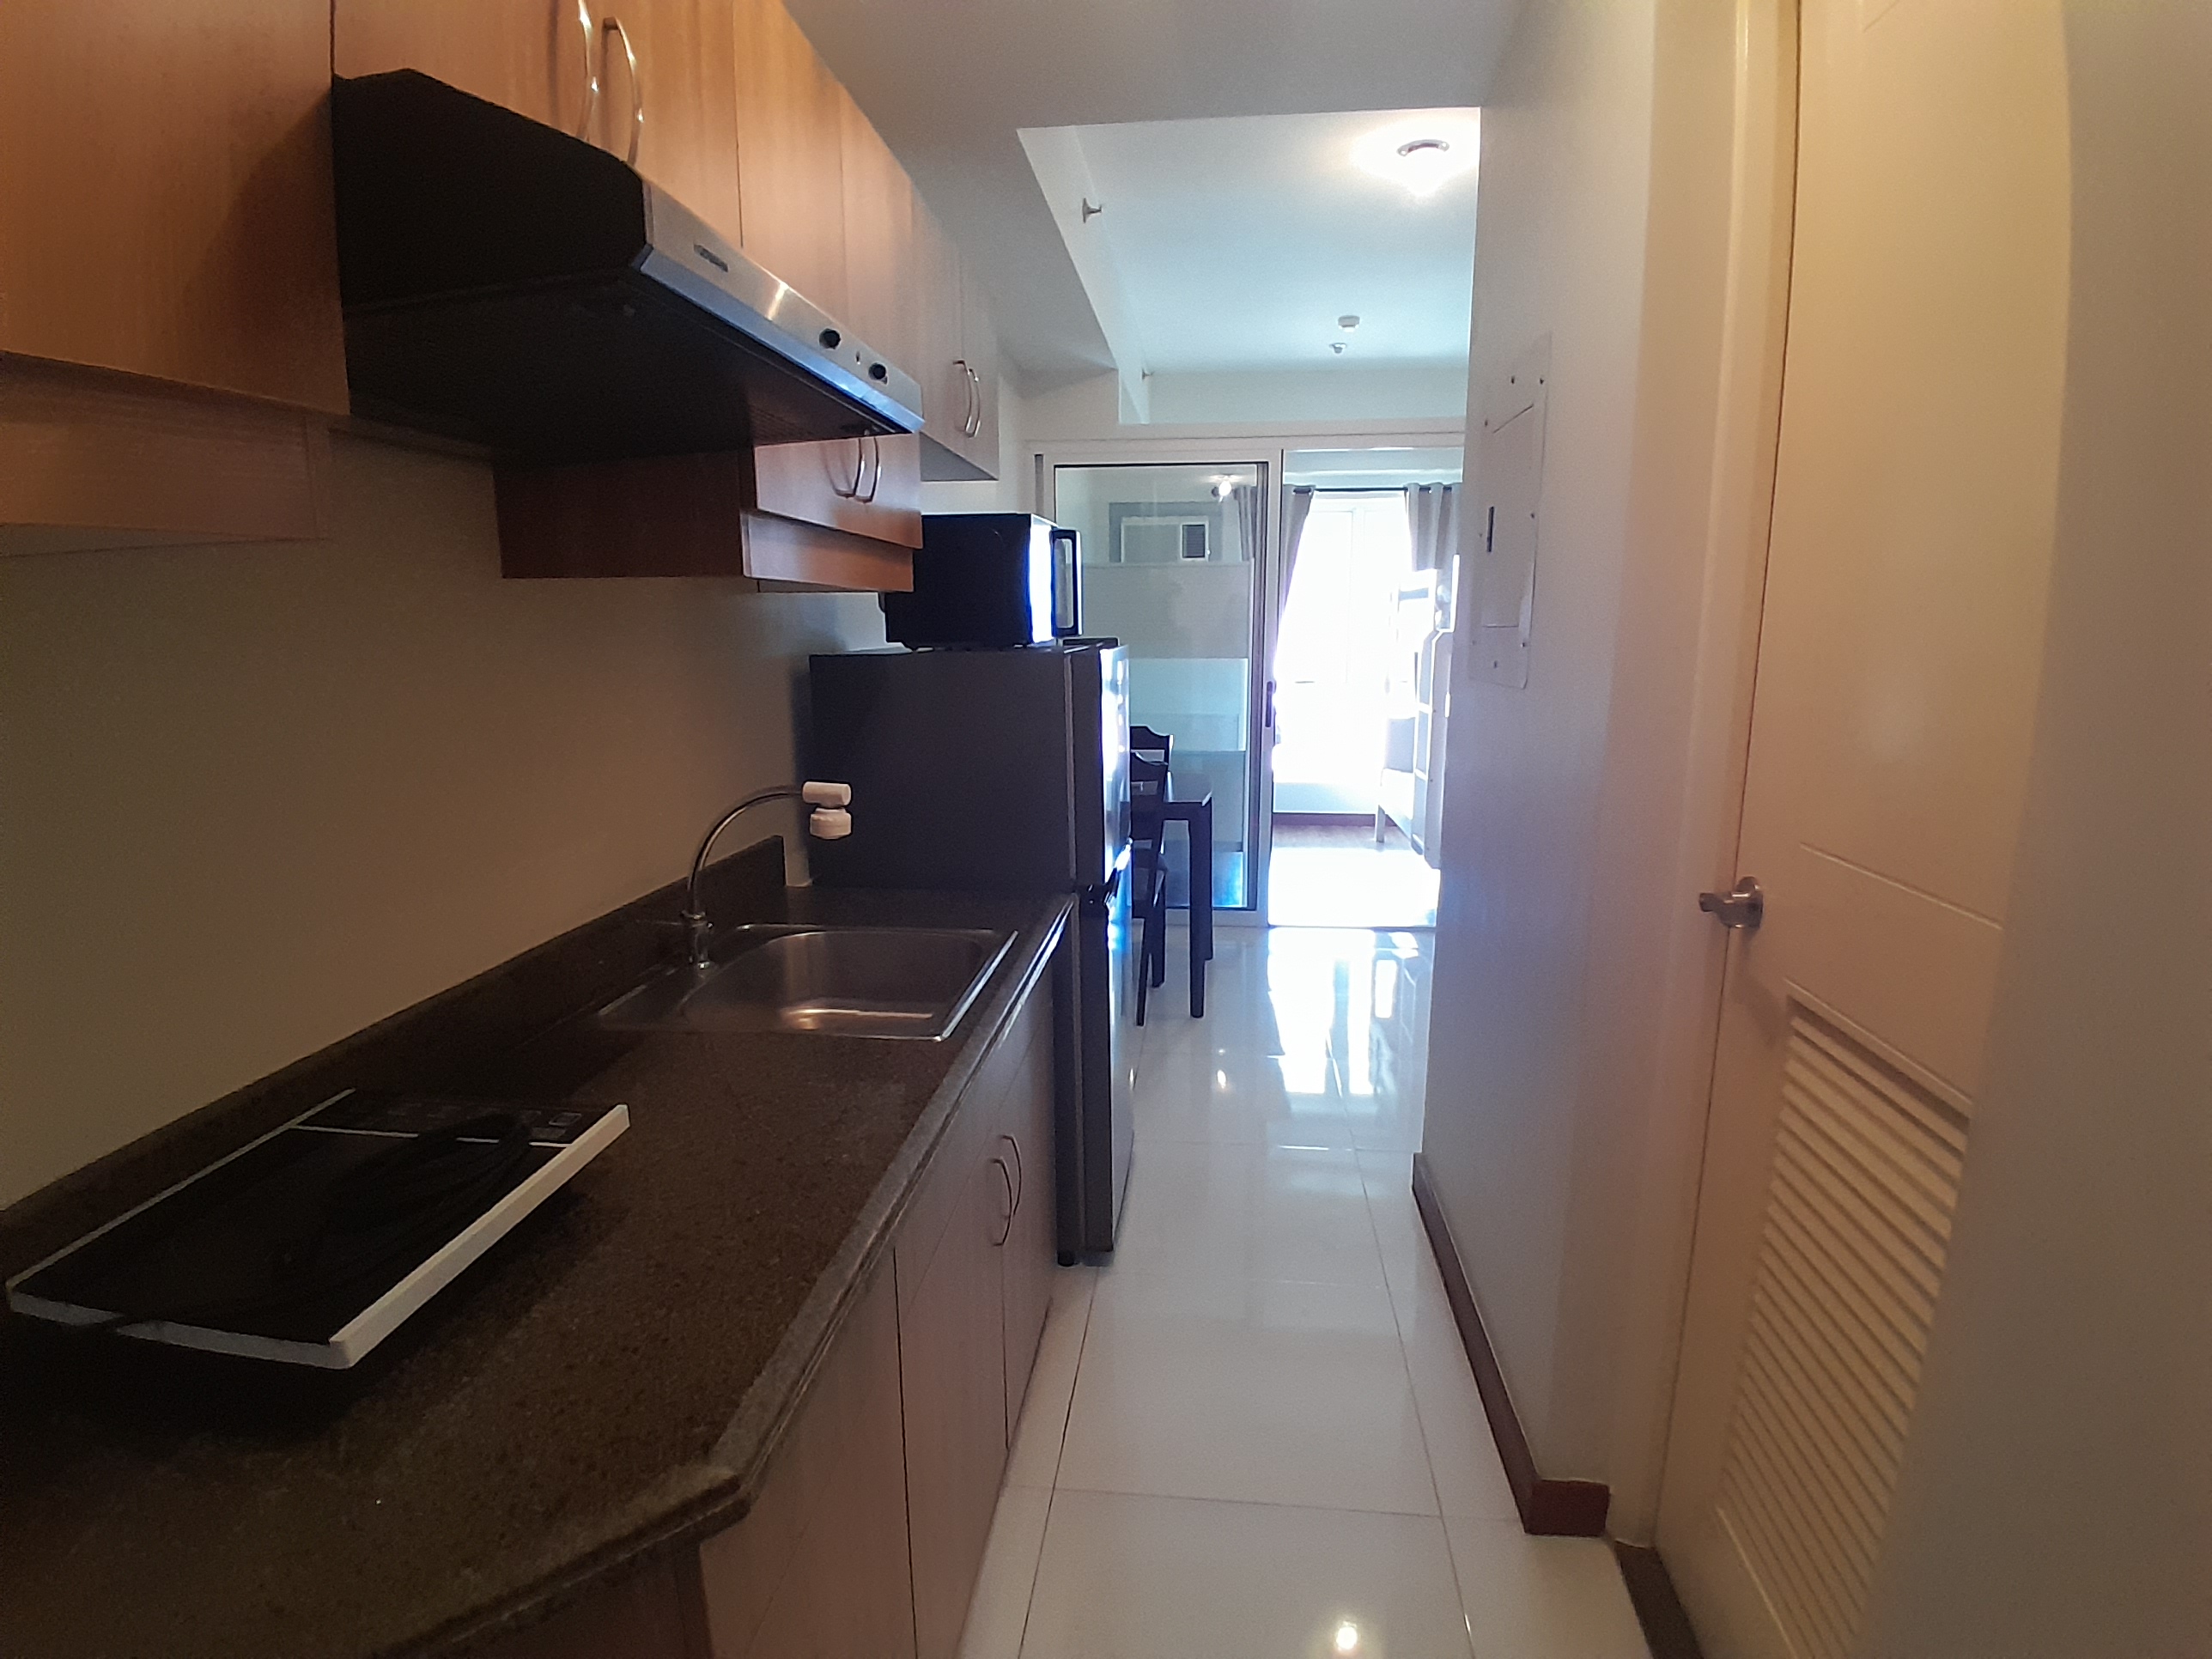 For Rent 1BR UNIT AT BRIO TOWER MAKATI